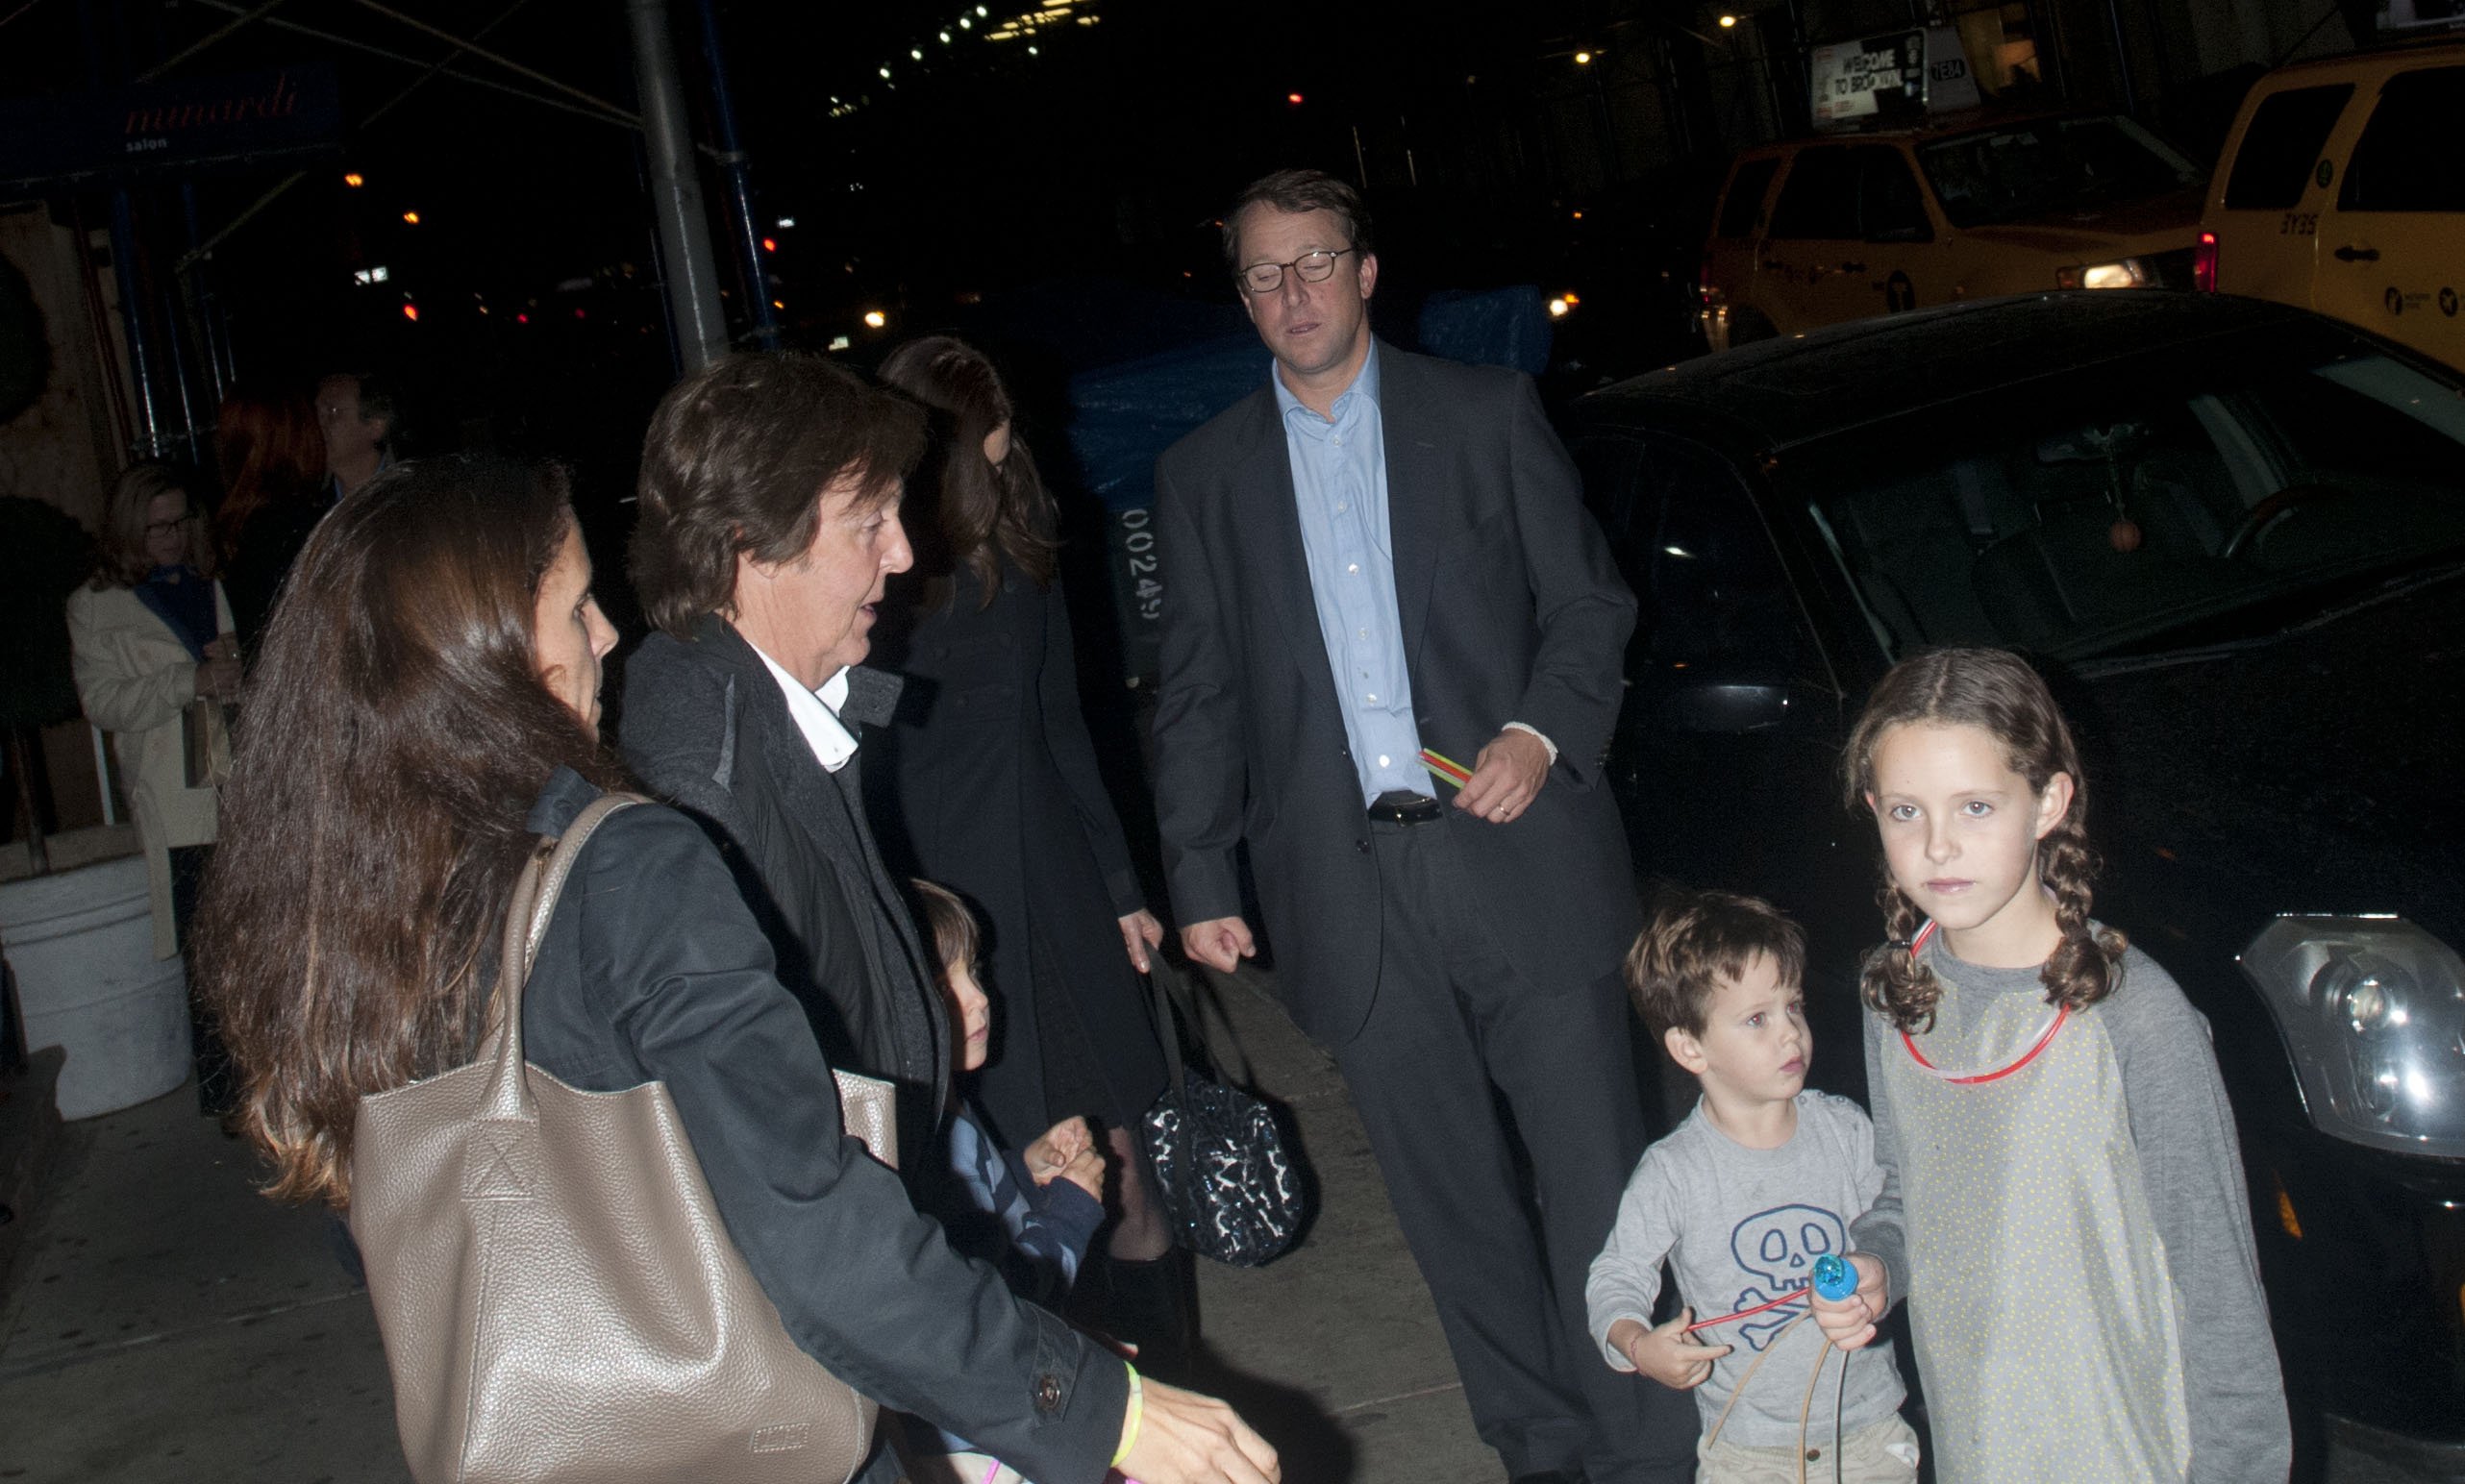 Paul McCartney, Nancy Shevell, and Beatrice McCartney leaving a party on October 24, 2012, in New York | Source: Getty Images